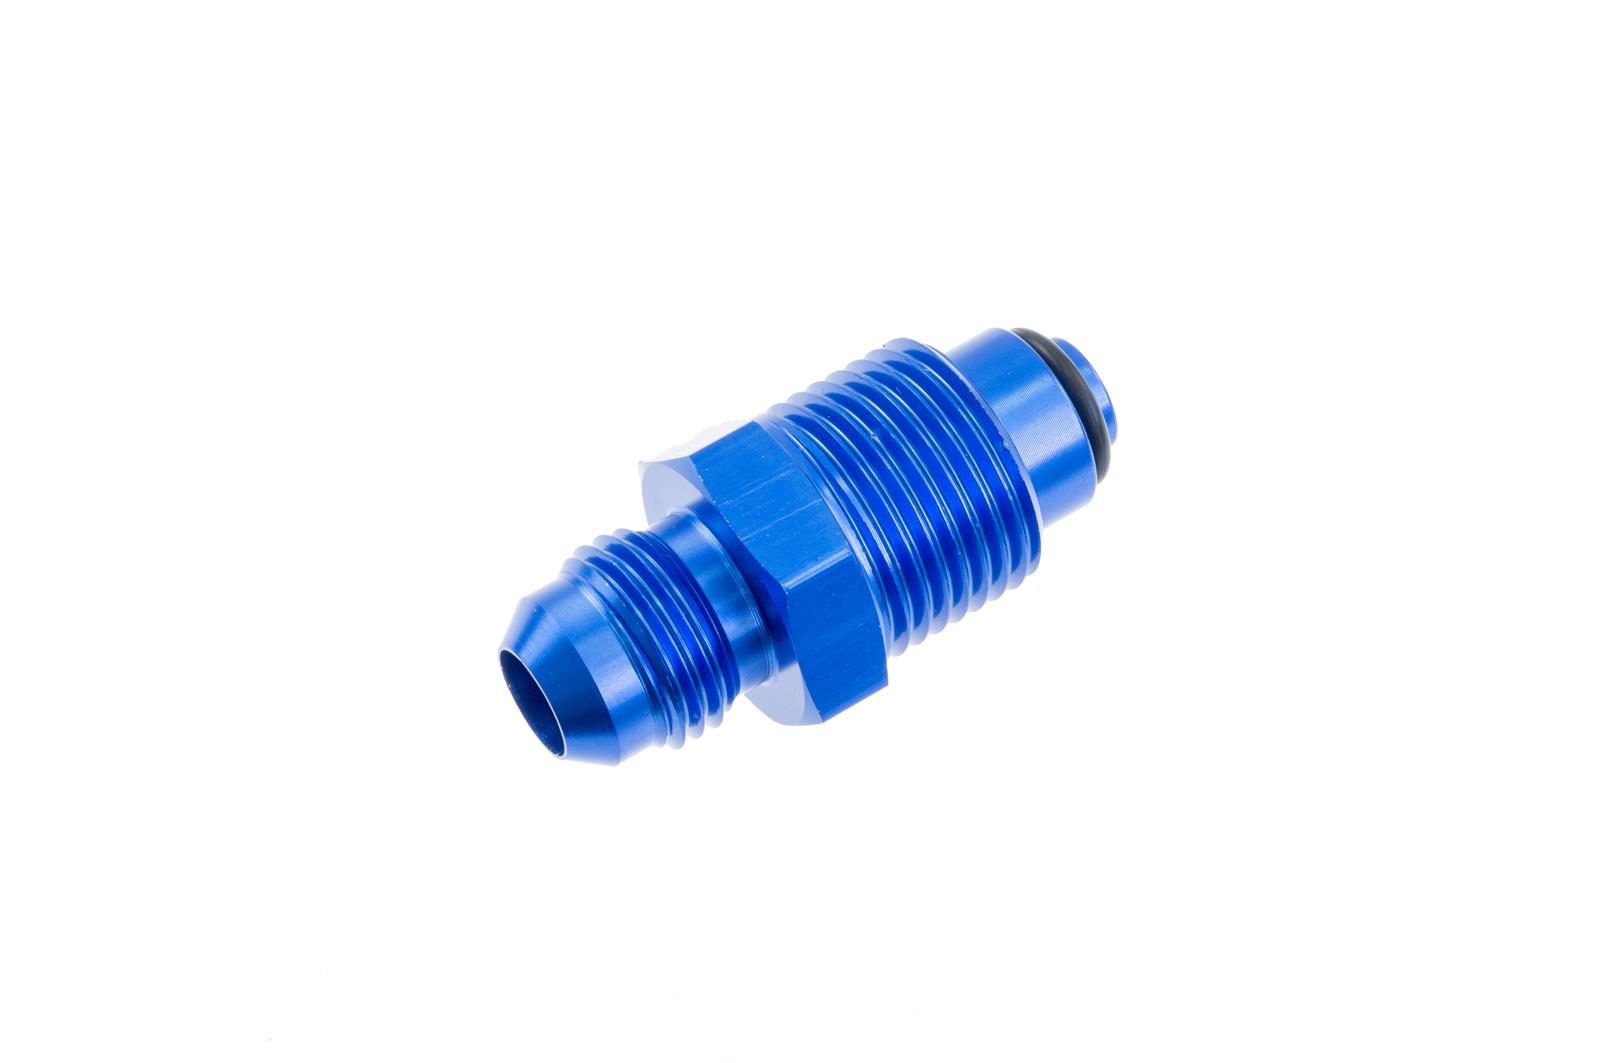 Redhorse Performance 8163-06-14-1 -06 AN Male to M14x1.5 o-ring, aluminum, blue